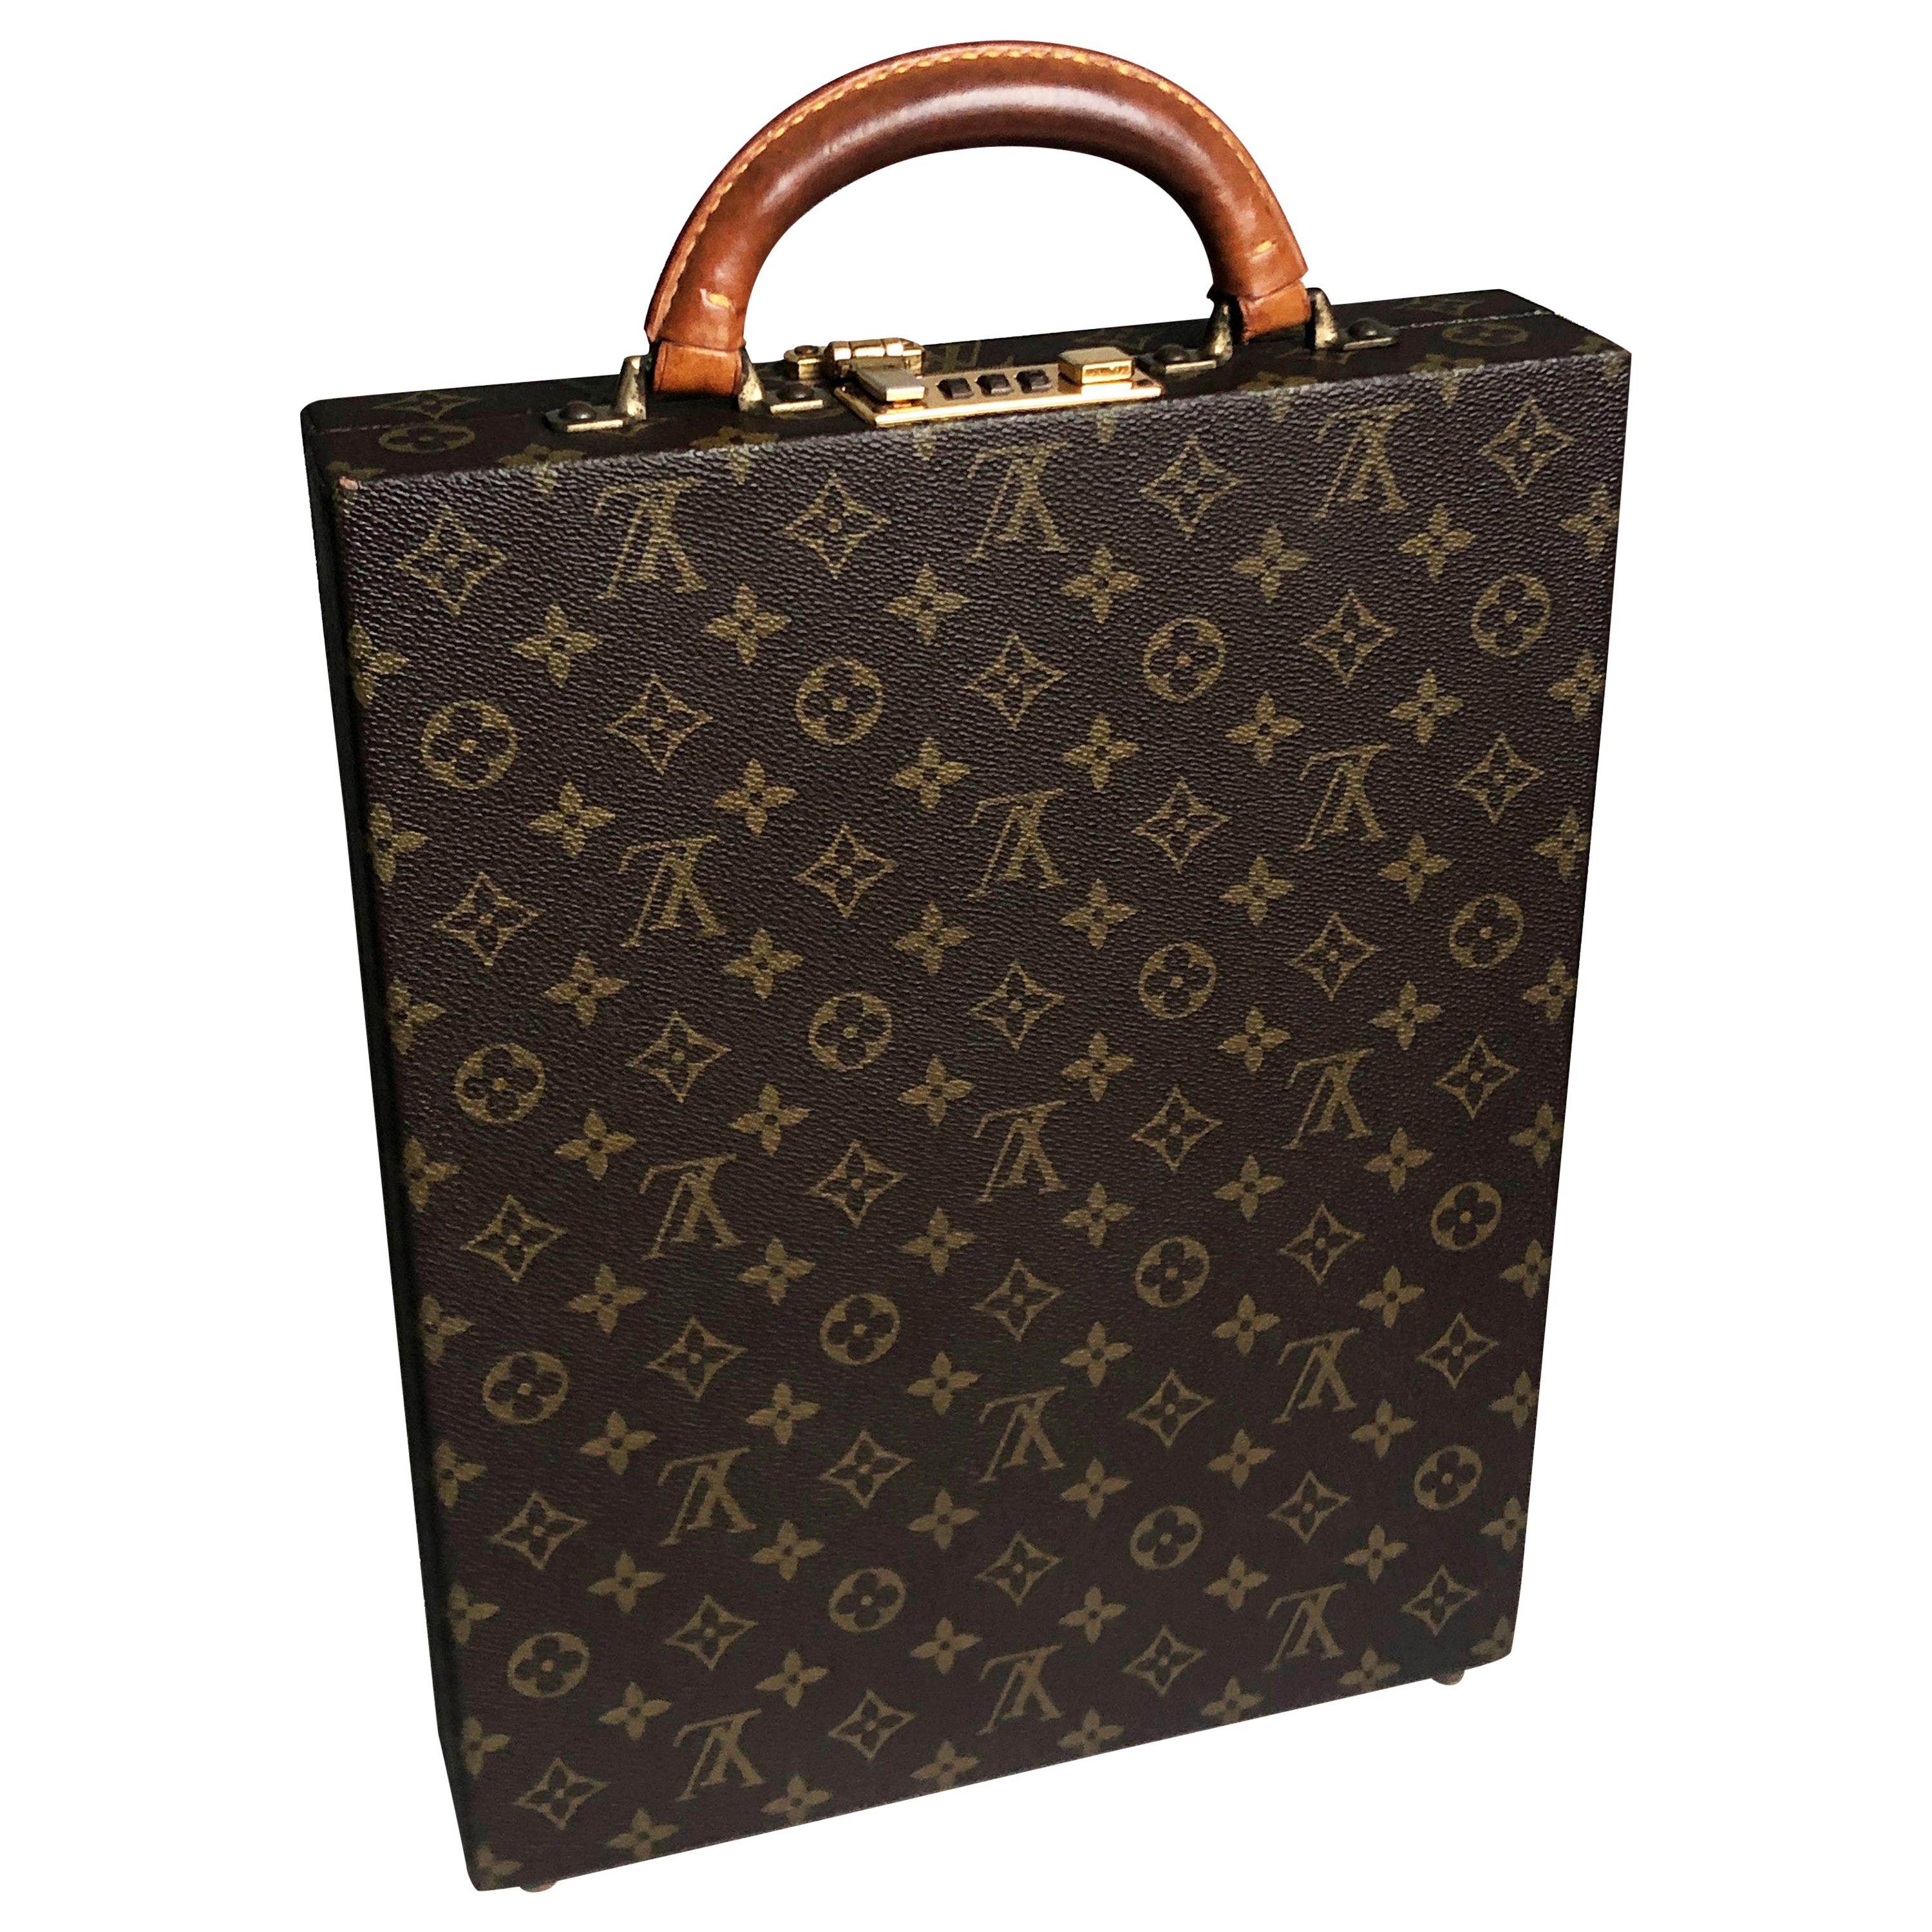 Our version of a briefcase is this Louis Vuitton bag